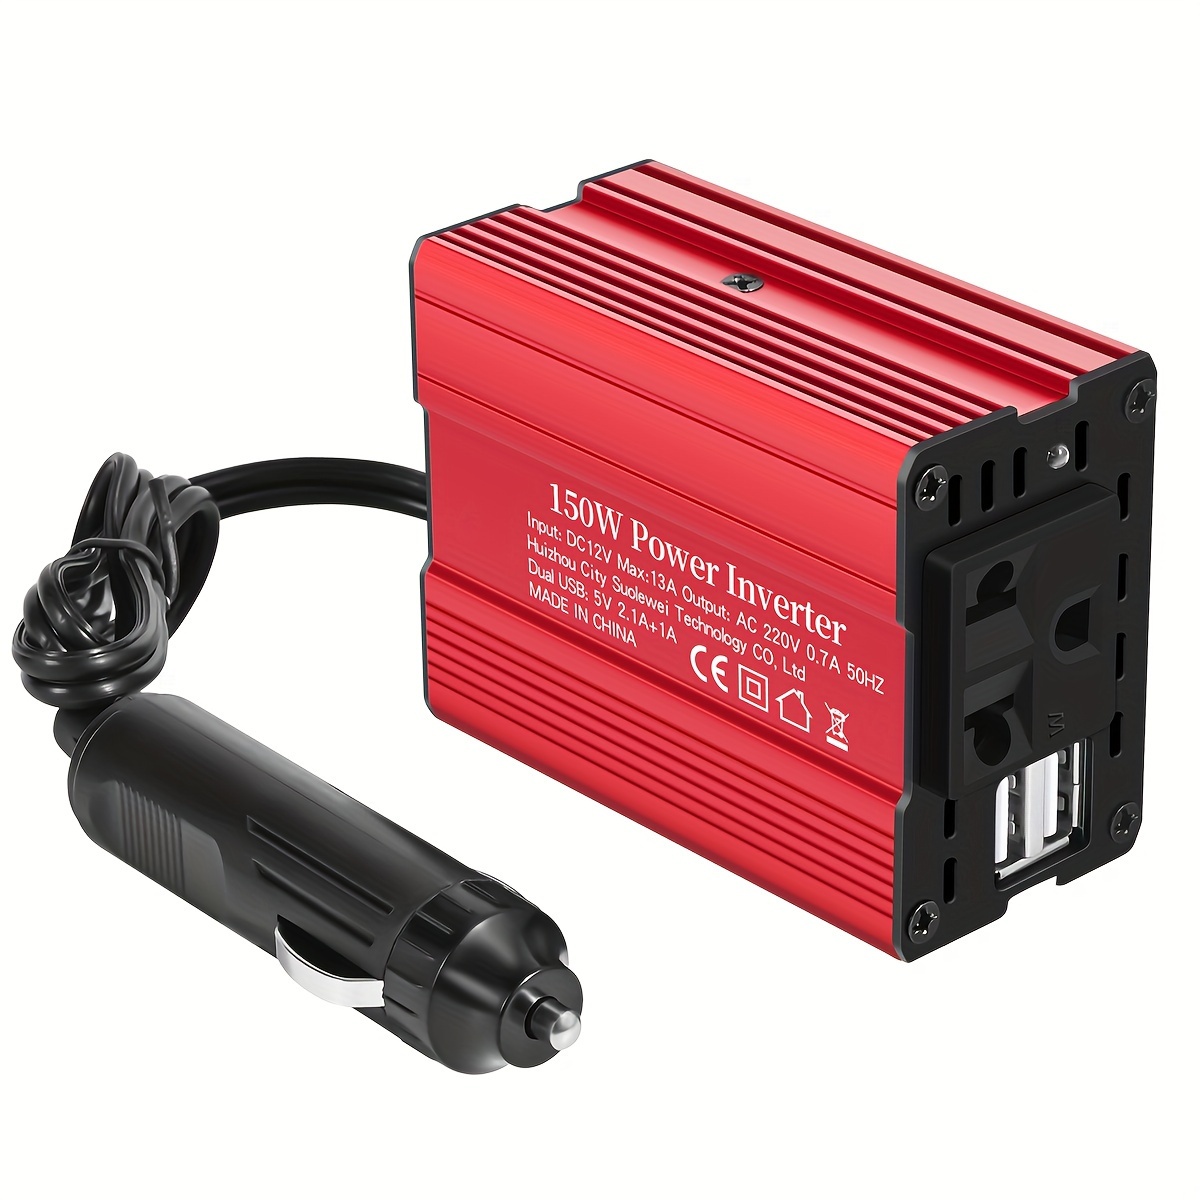 60W Power Inverter Modified Sine Wave DC to AC 220V USB Charger